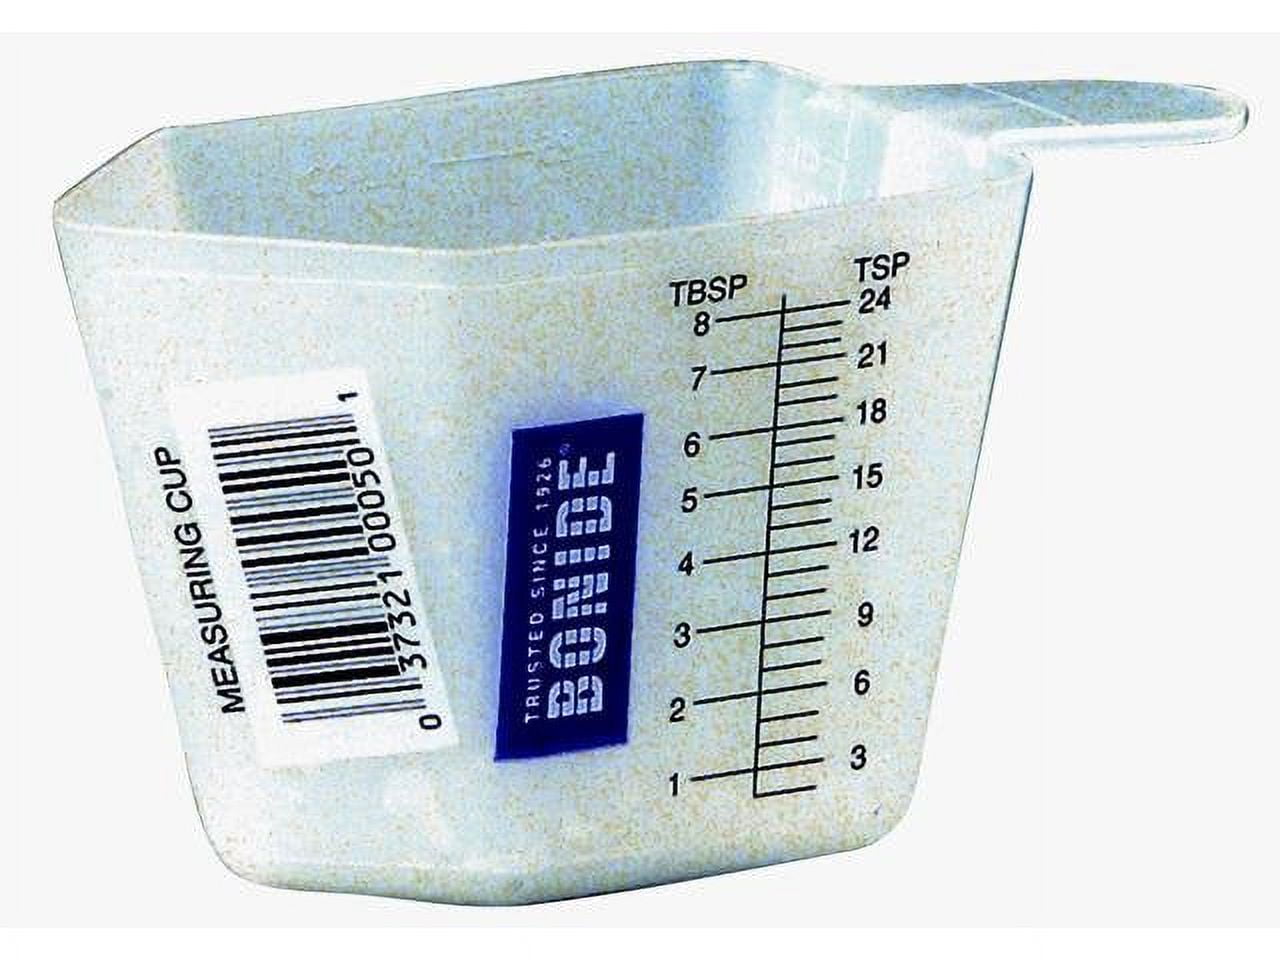 Measuring Cup - Lawn Depot